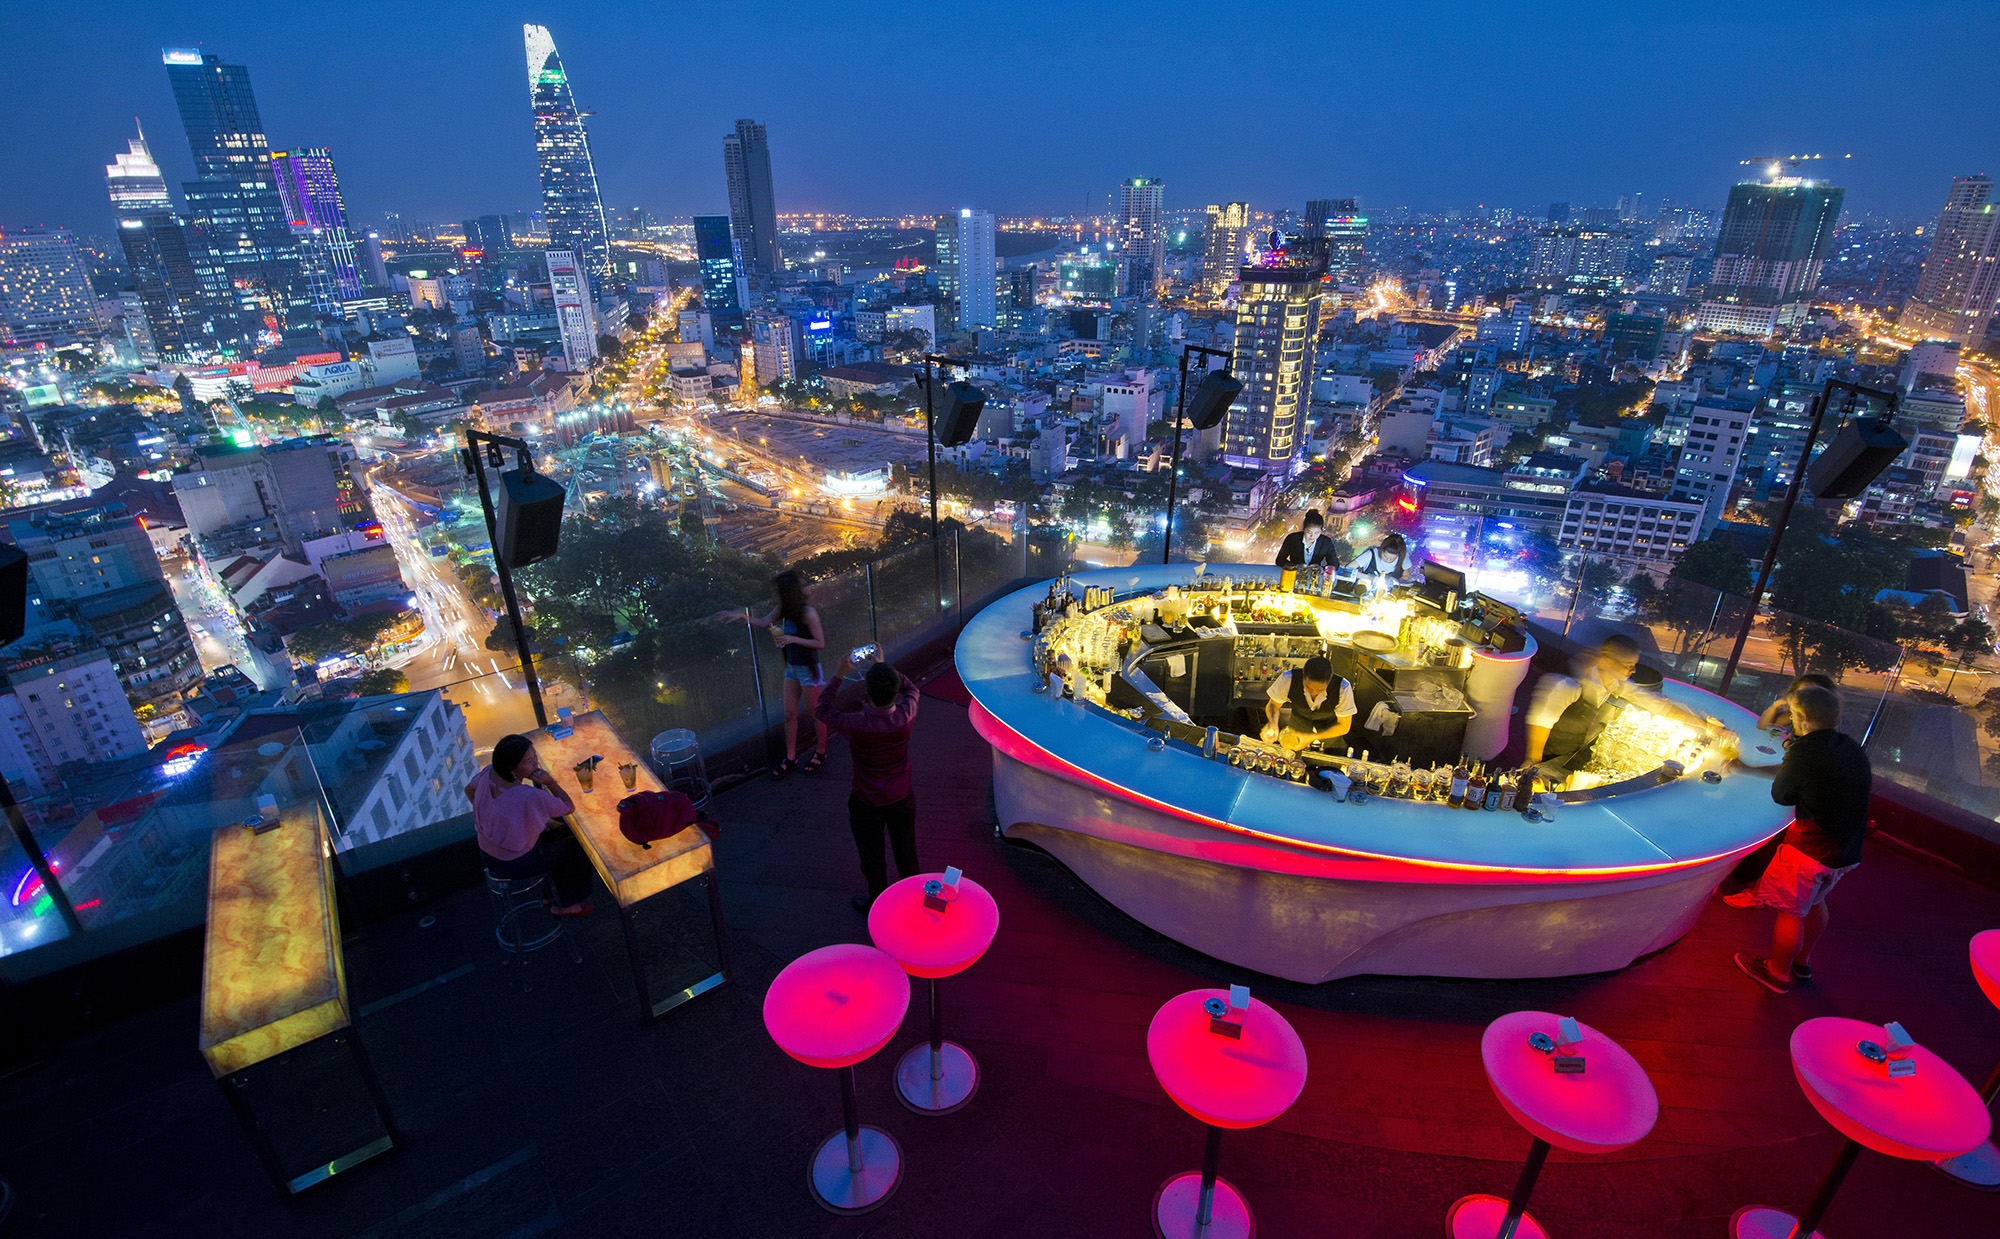 Ho Chi Minh City night skyline from a rooftop bar